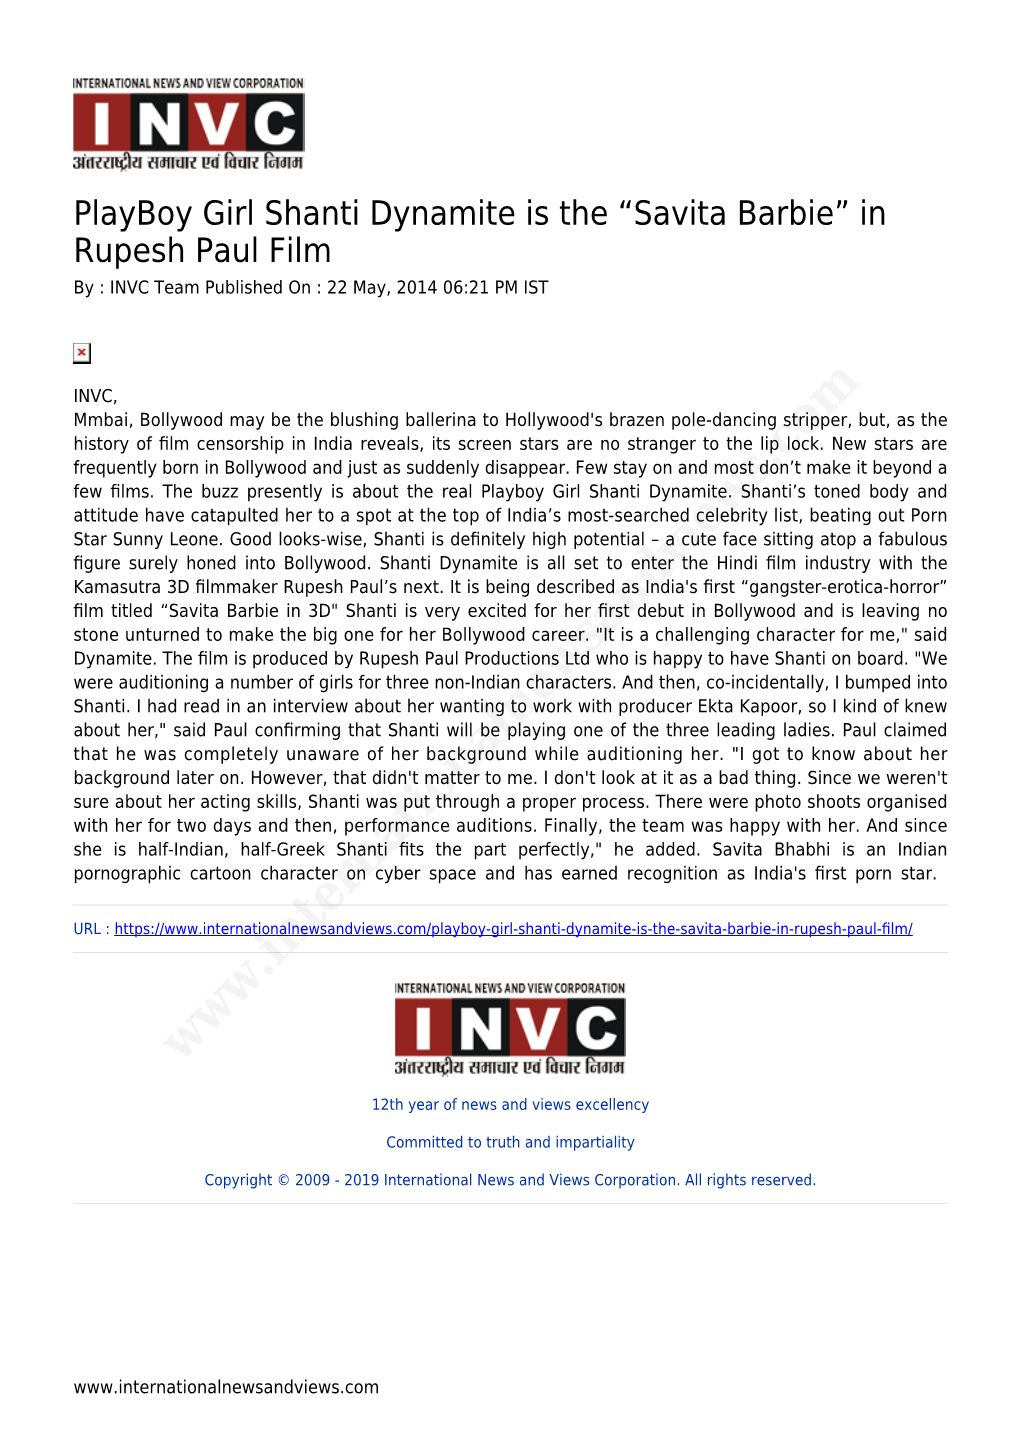 “Savita Barbie” in Rupesh Paul Film by : INVC Team Published on : 22 May, 2014 06:21 PM IST